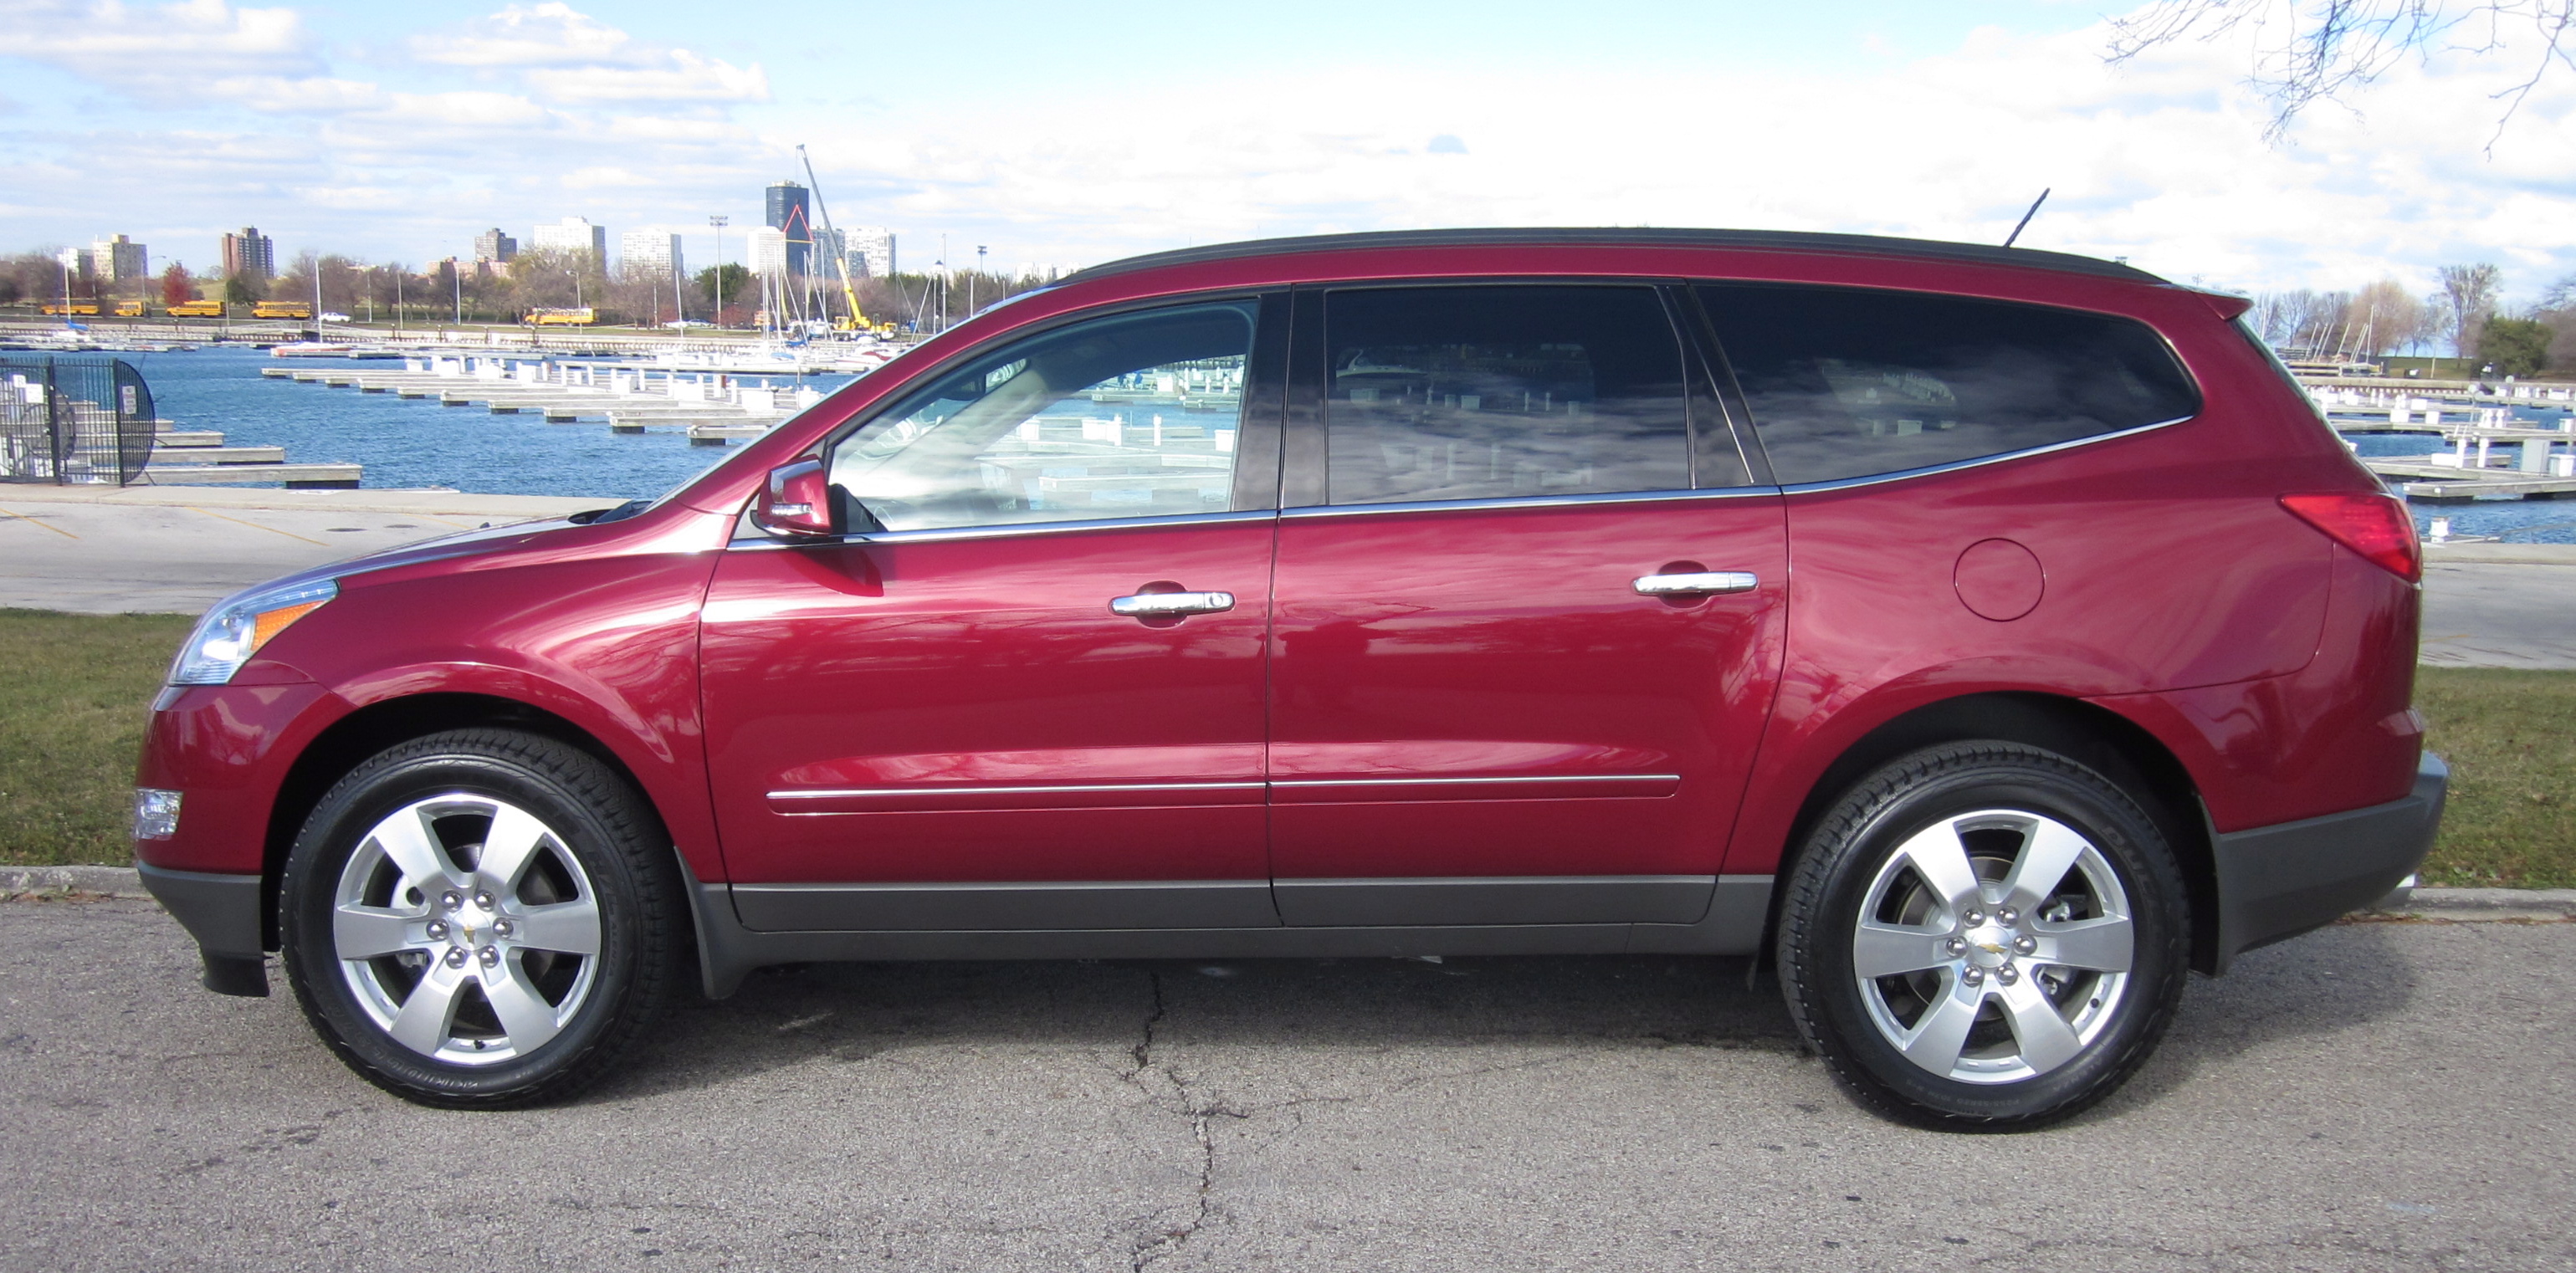 Used 2011 Chevrolet Traverse for Sale Near Me | Cars.com